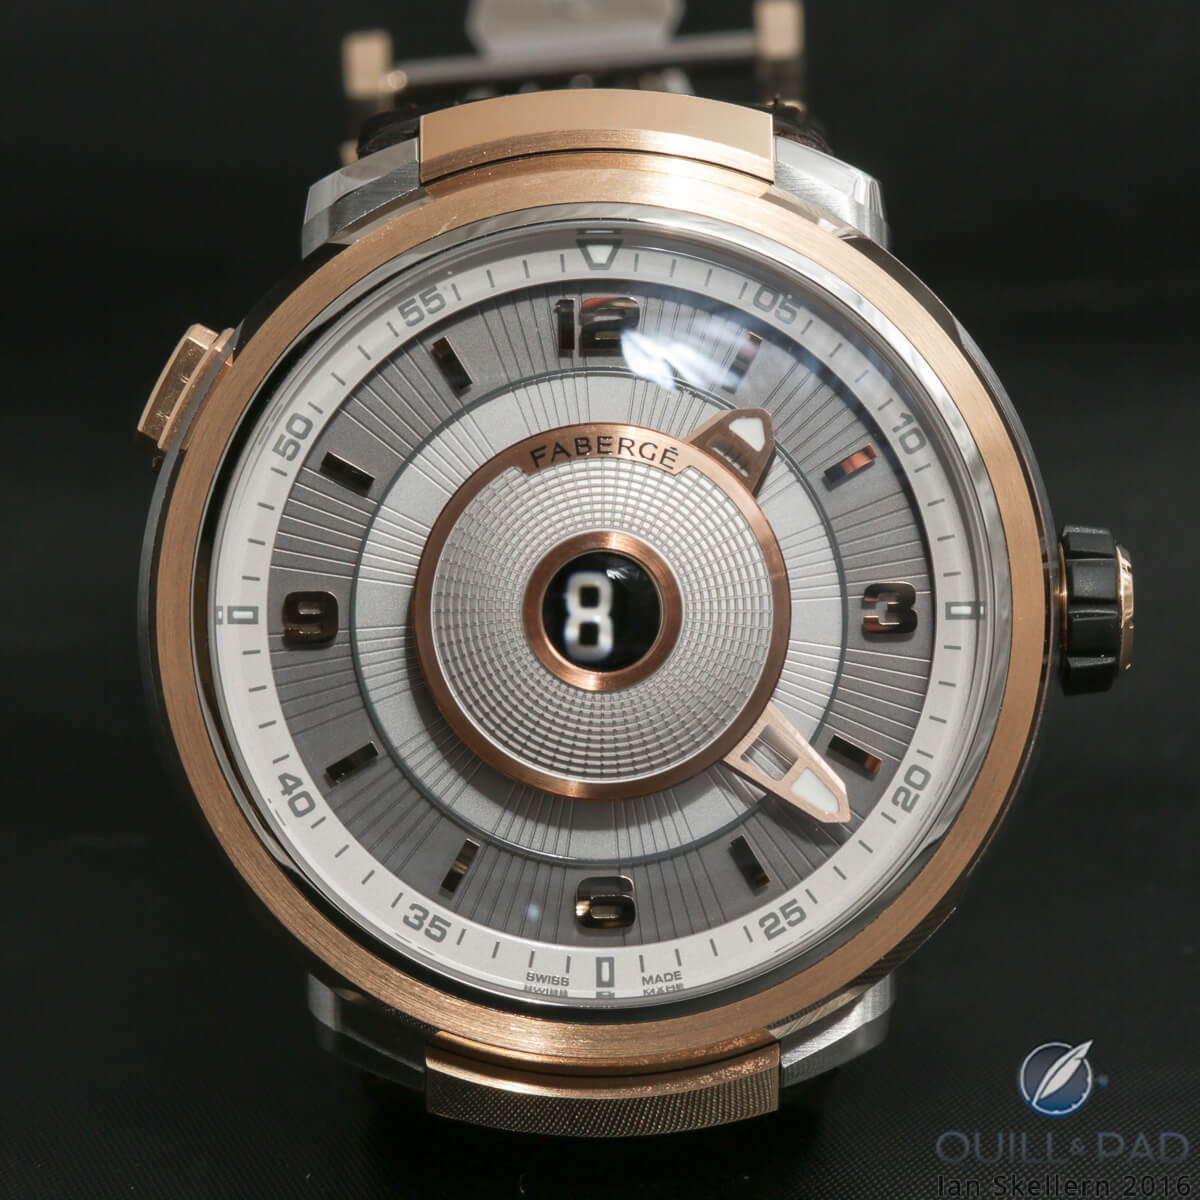 Fabergé Visionnaire DTZ in pink gold